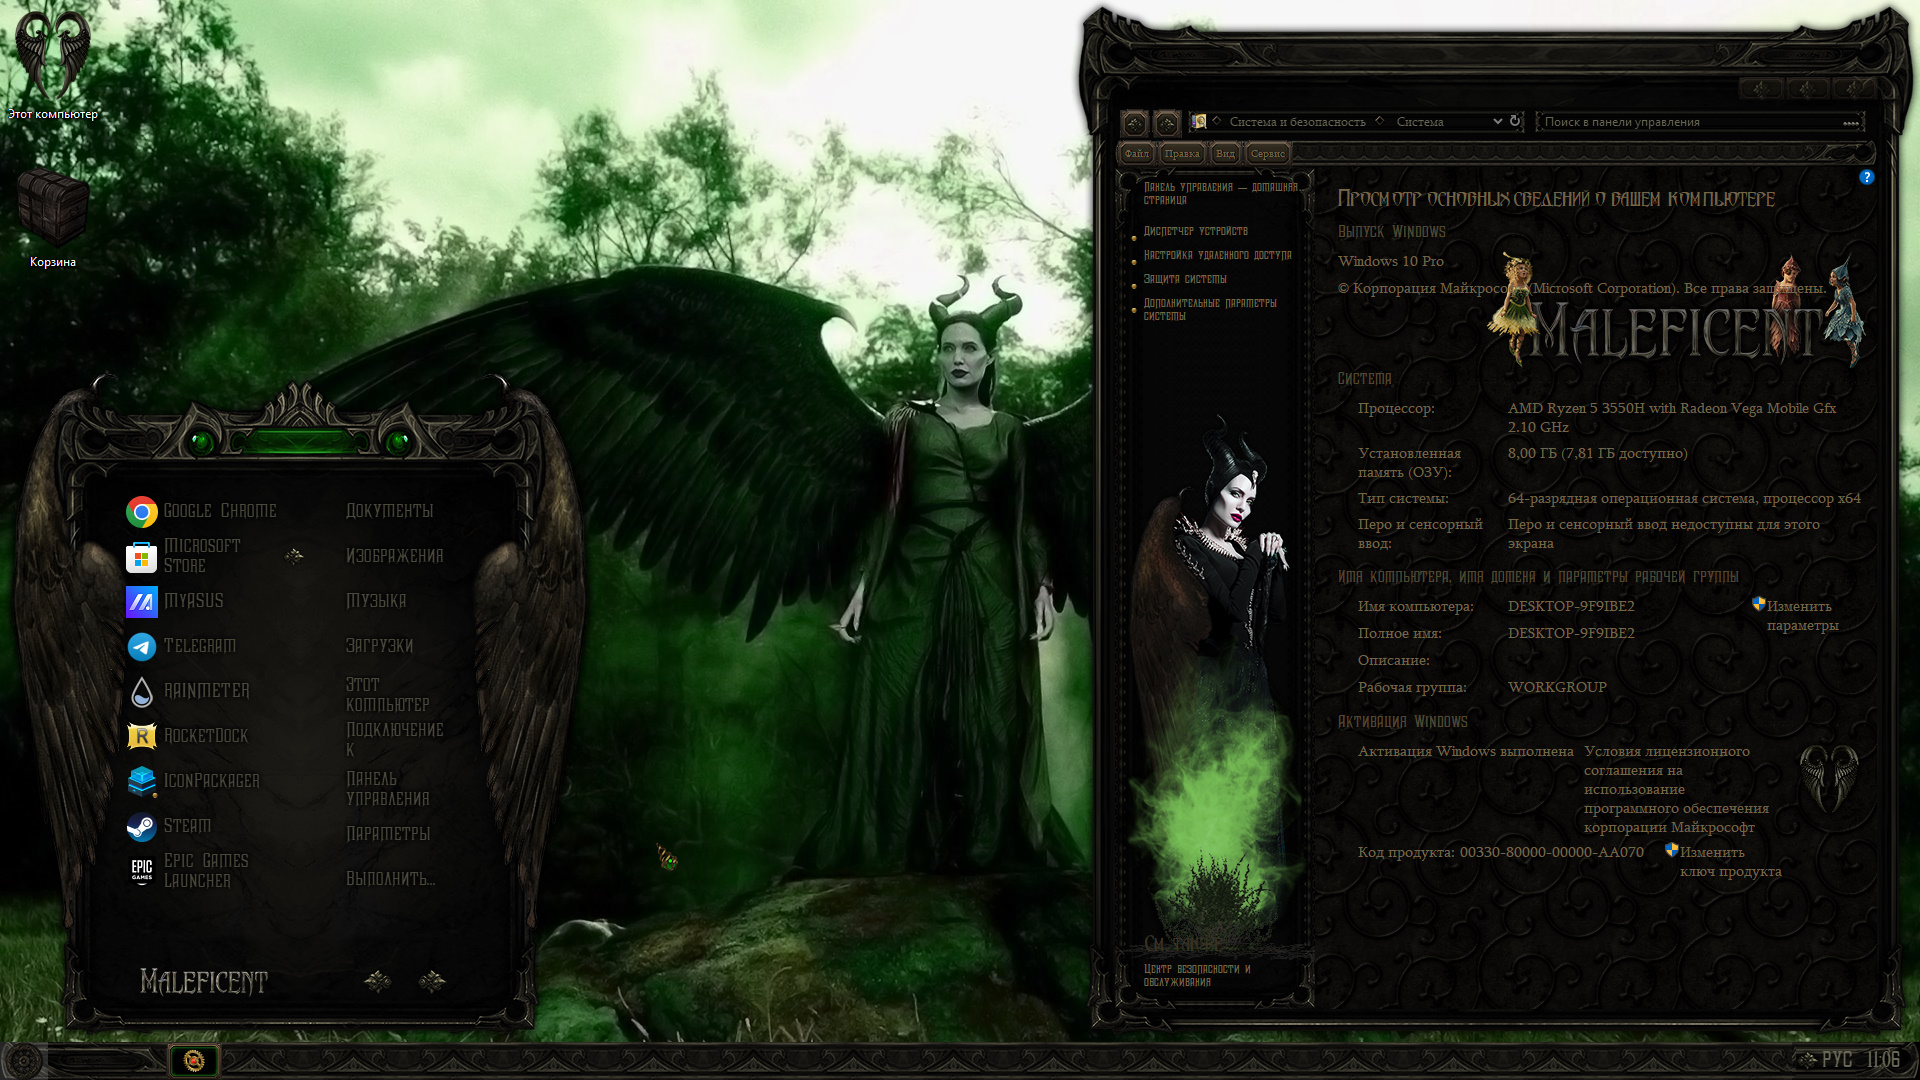 MALEFICENT Premium Themes for Windows 10 by ORTHODOXX67